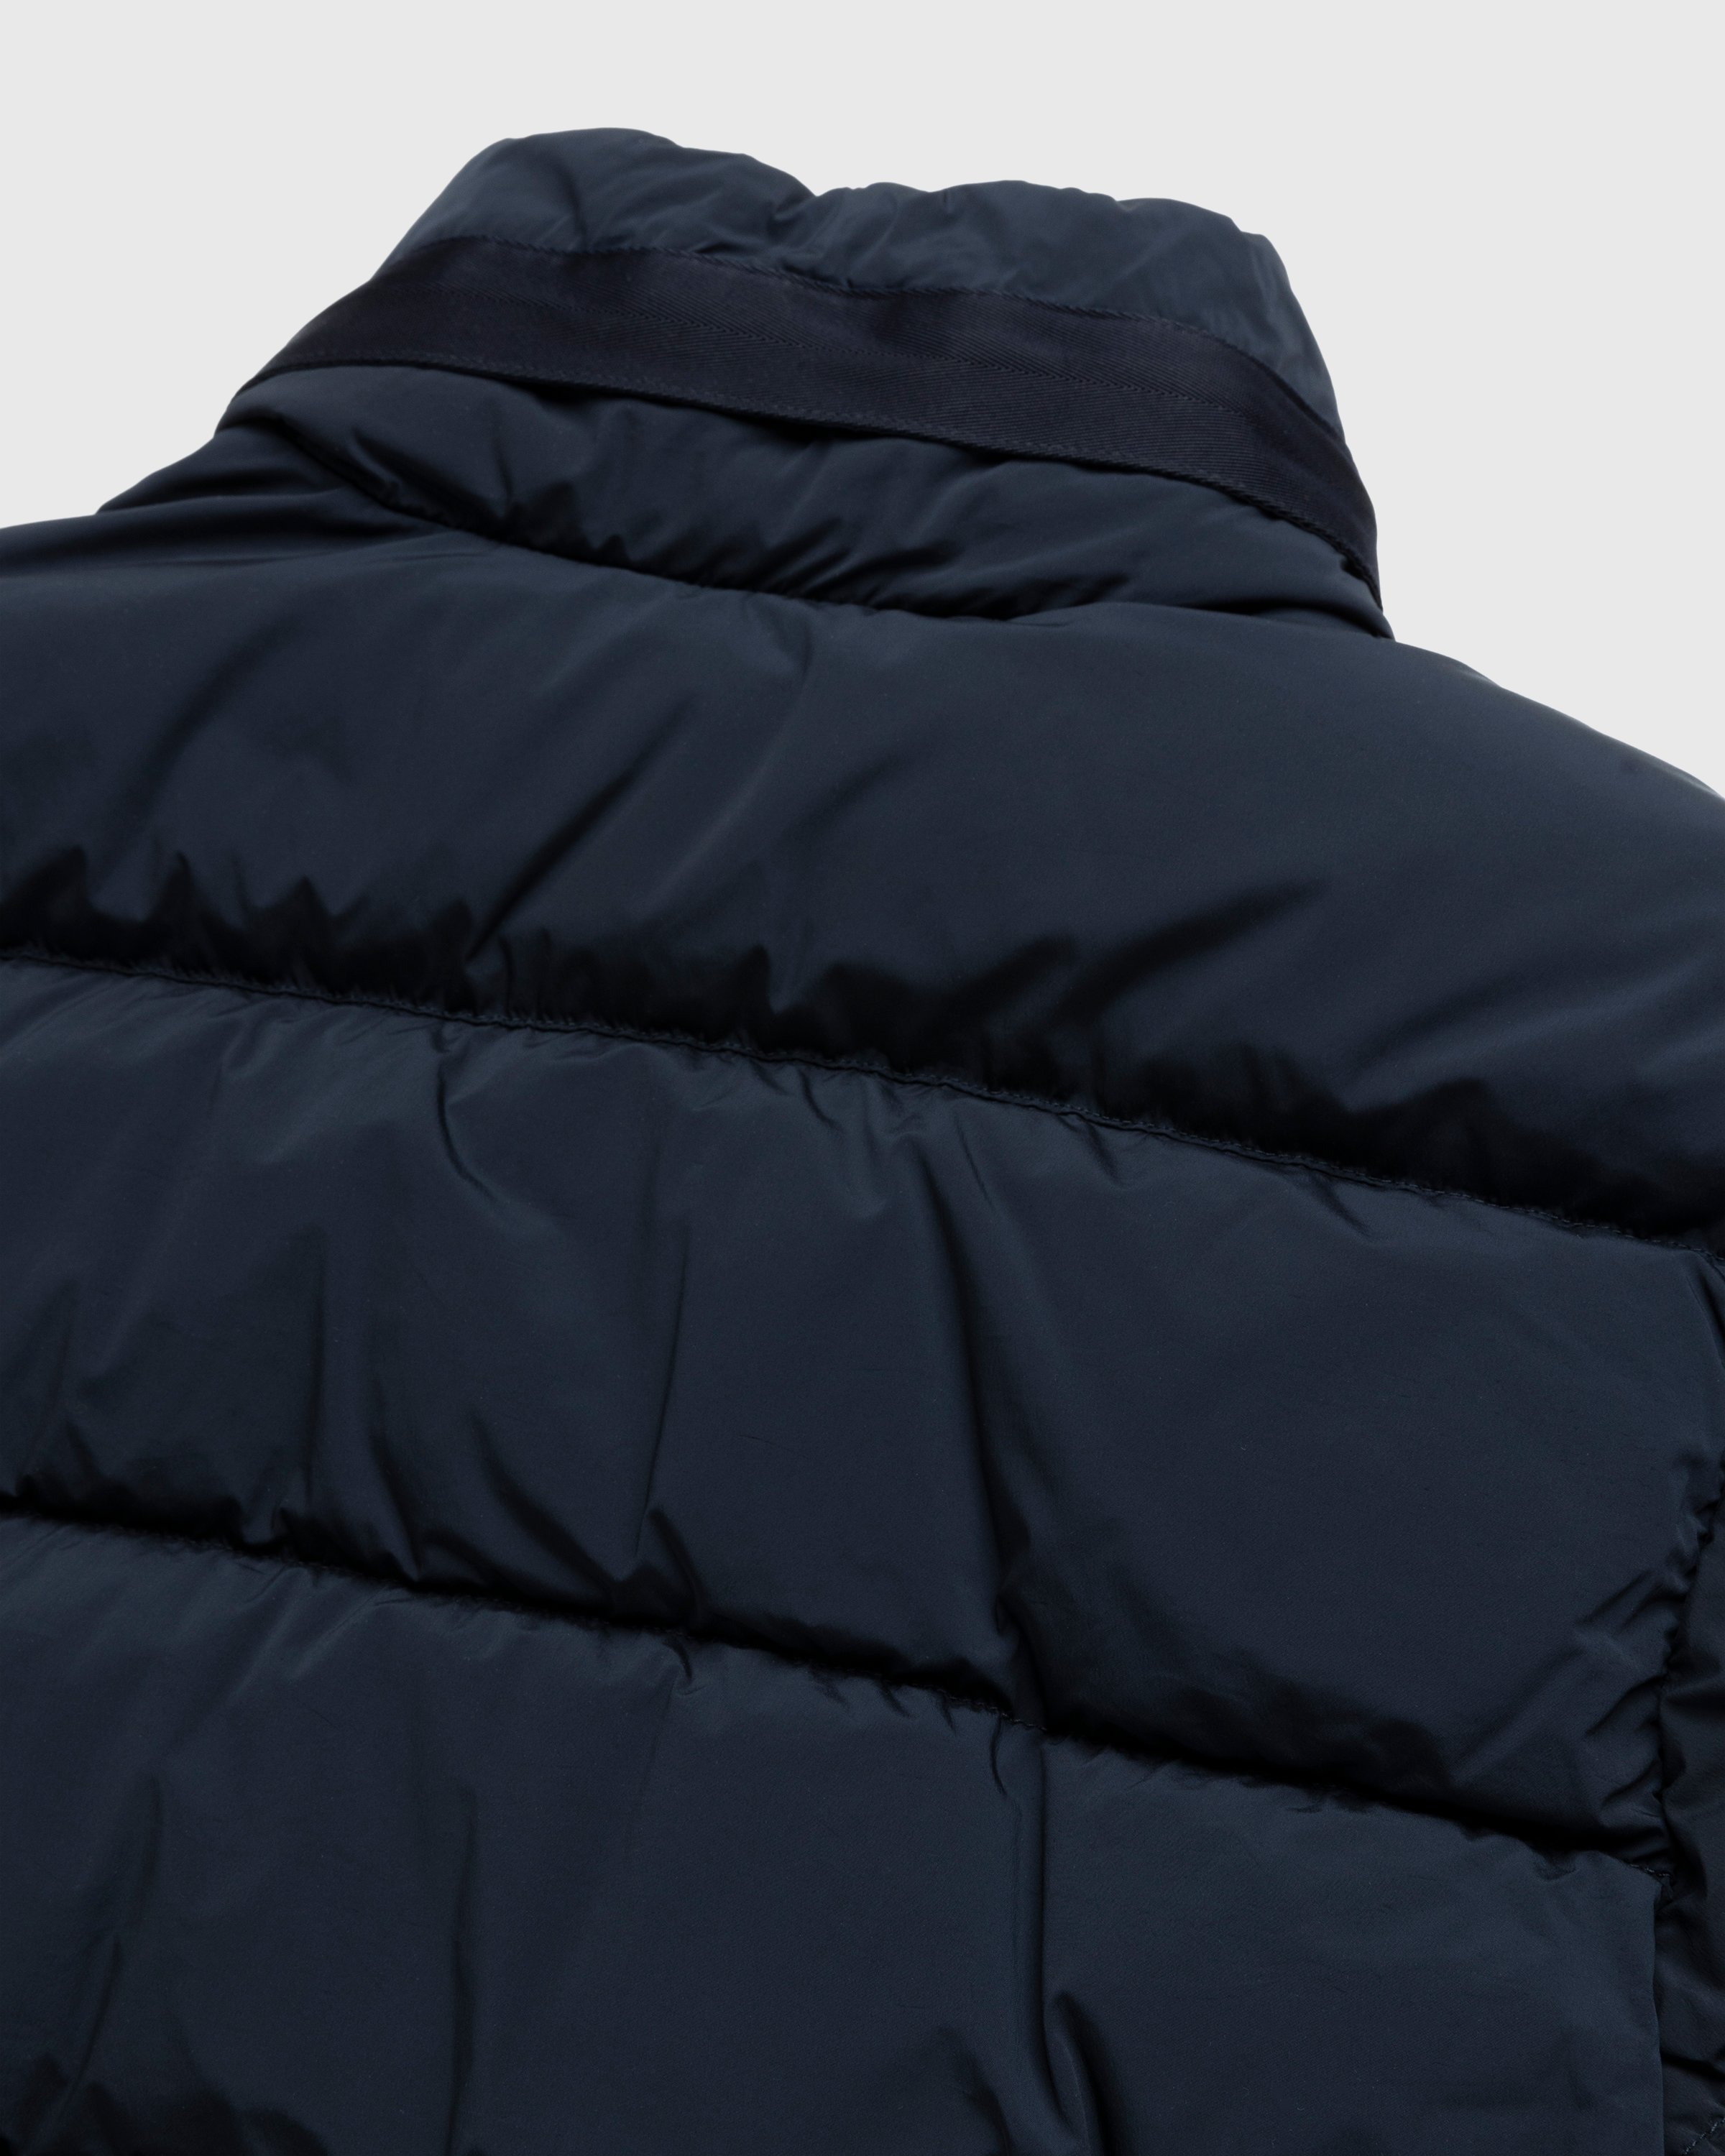 C.P. Company - Nycra-R Down Jacket Black - Outerwear - Black - Image 3